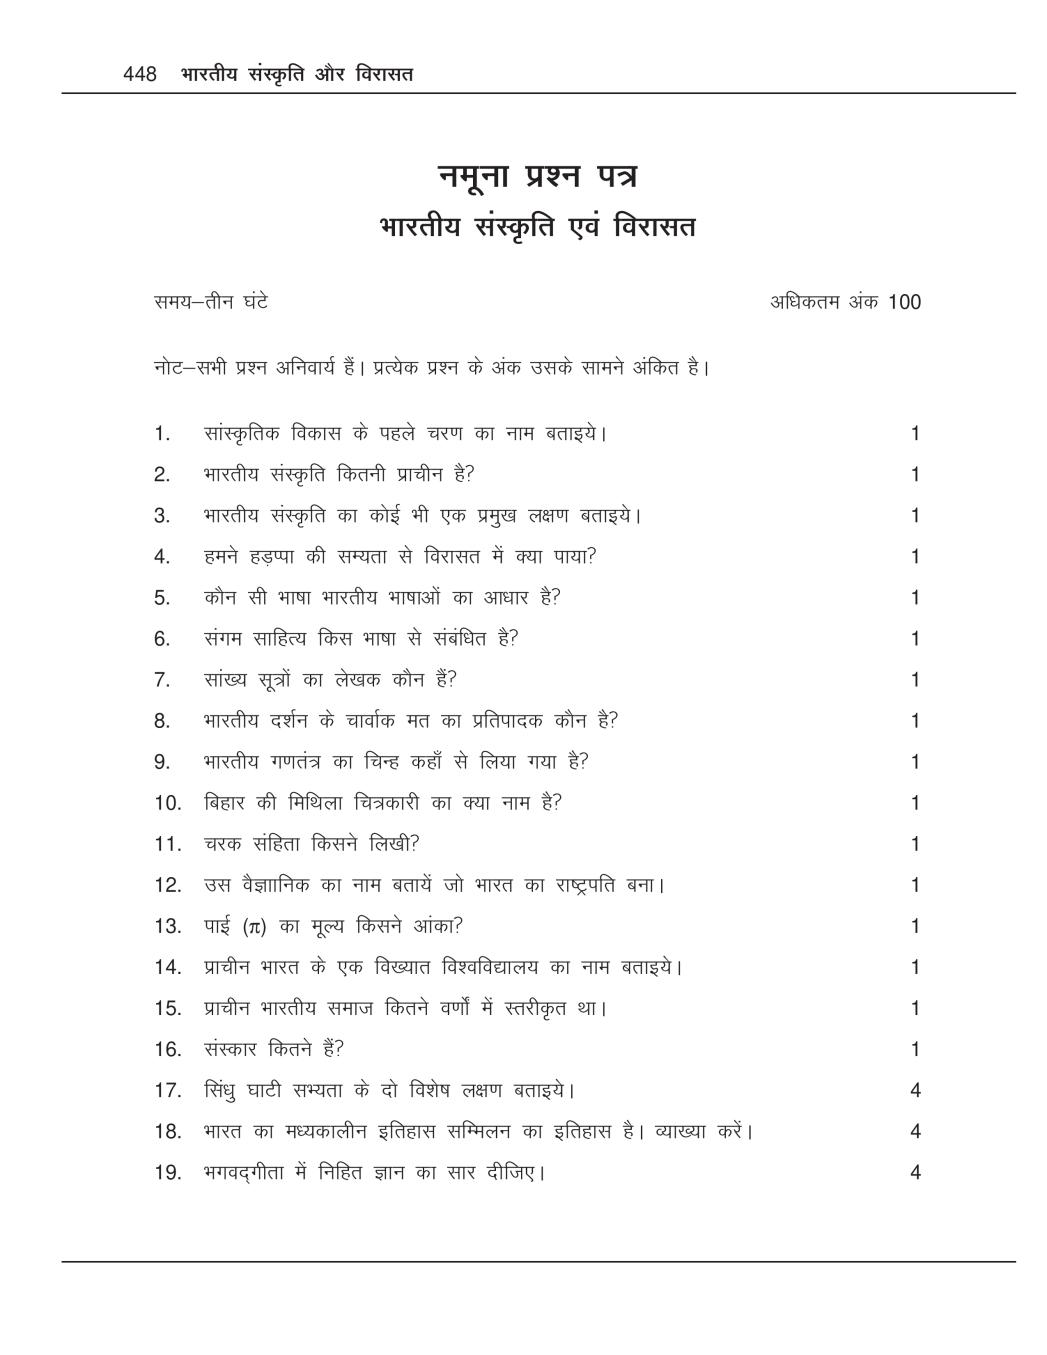 NIOS Class 10 Sample Paper 2020 - Indian Culture and Heritage (Hindi Medium) - Page 1